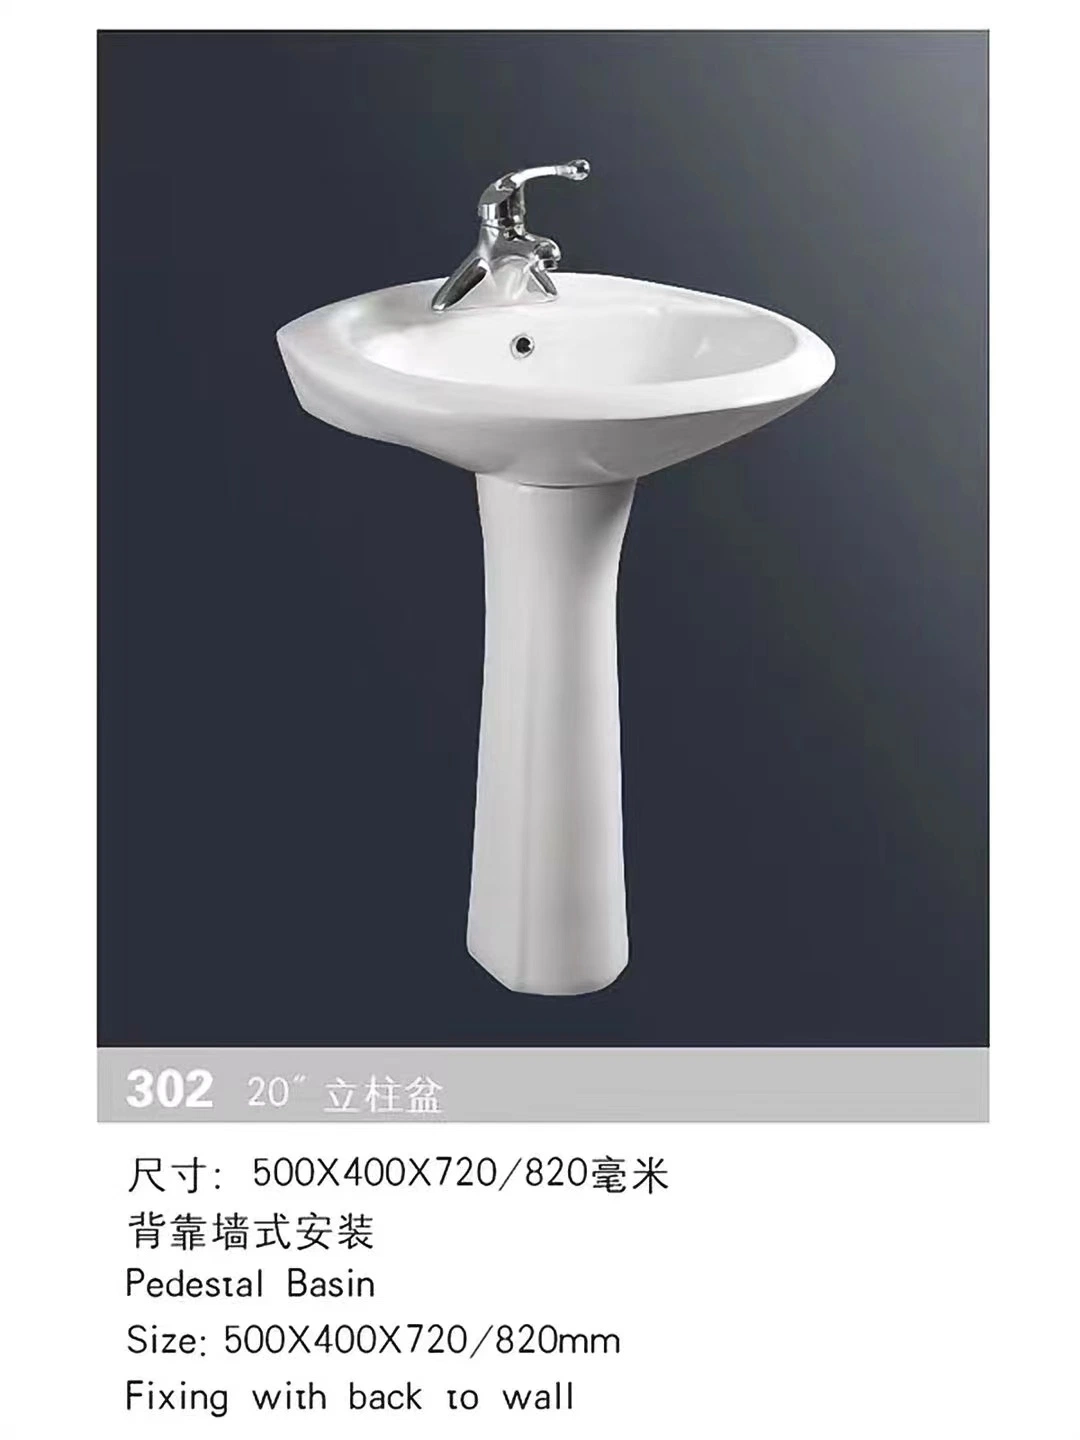 Factory Whole Pedestal Wash Basin Wall Back for Bathroom with Mixer Faucet